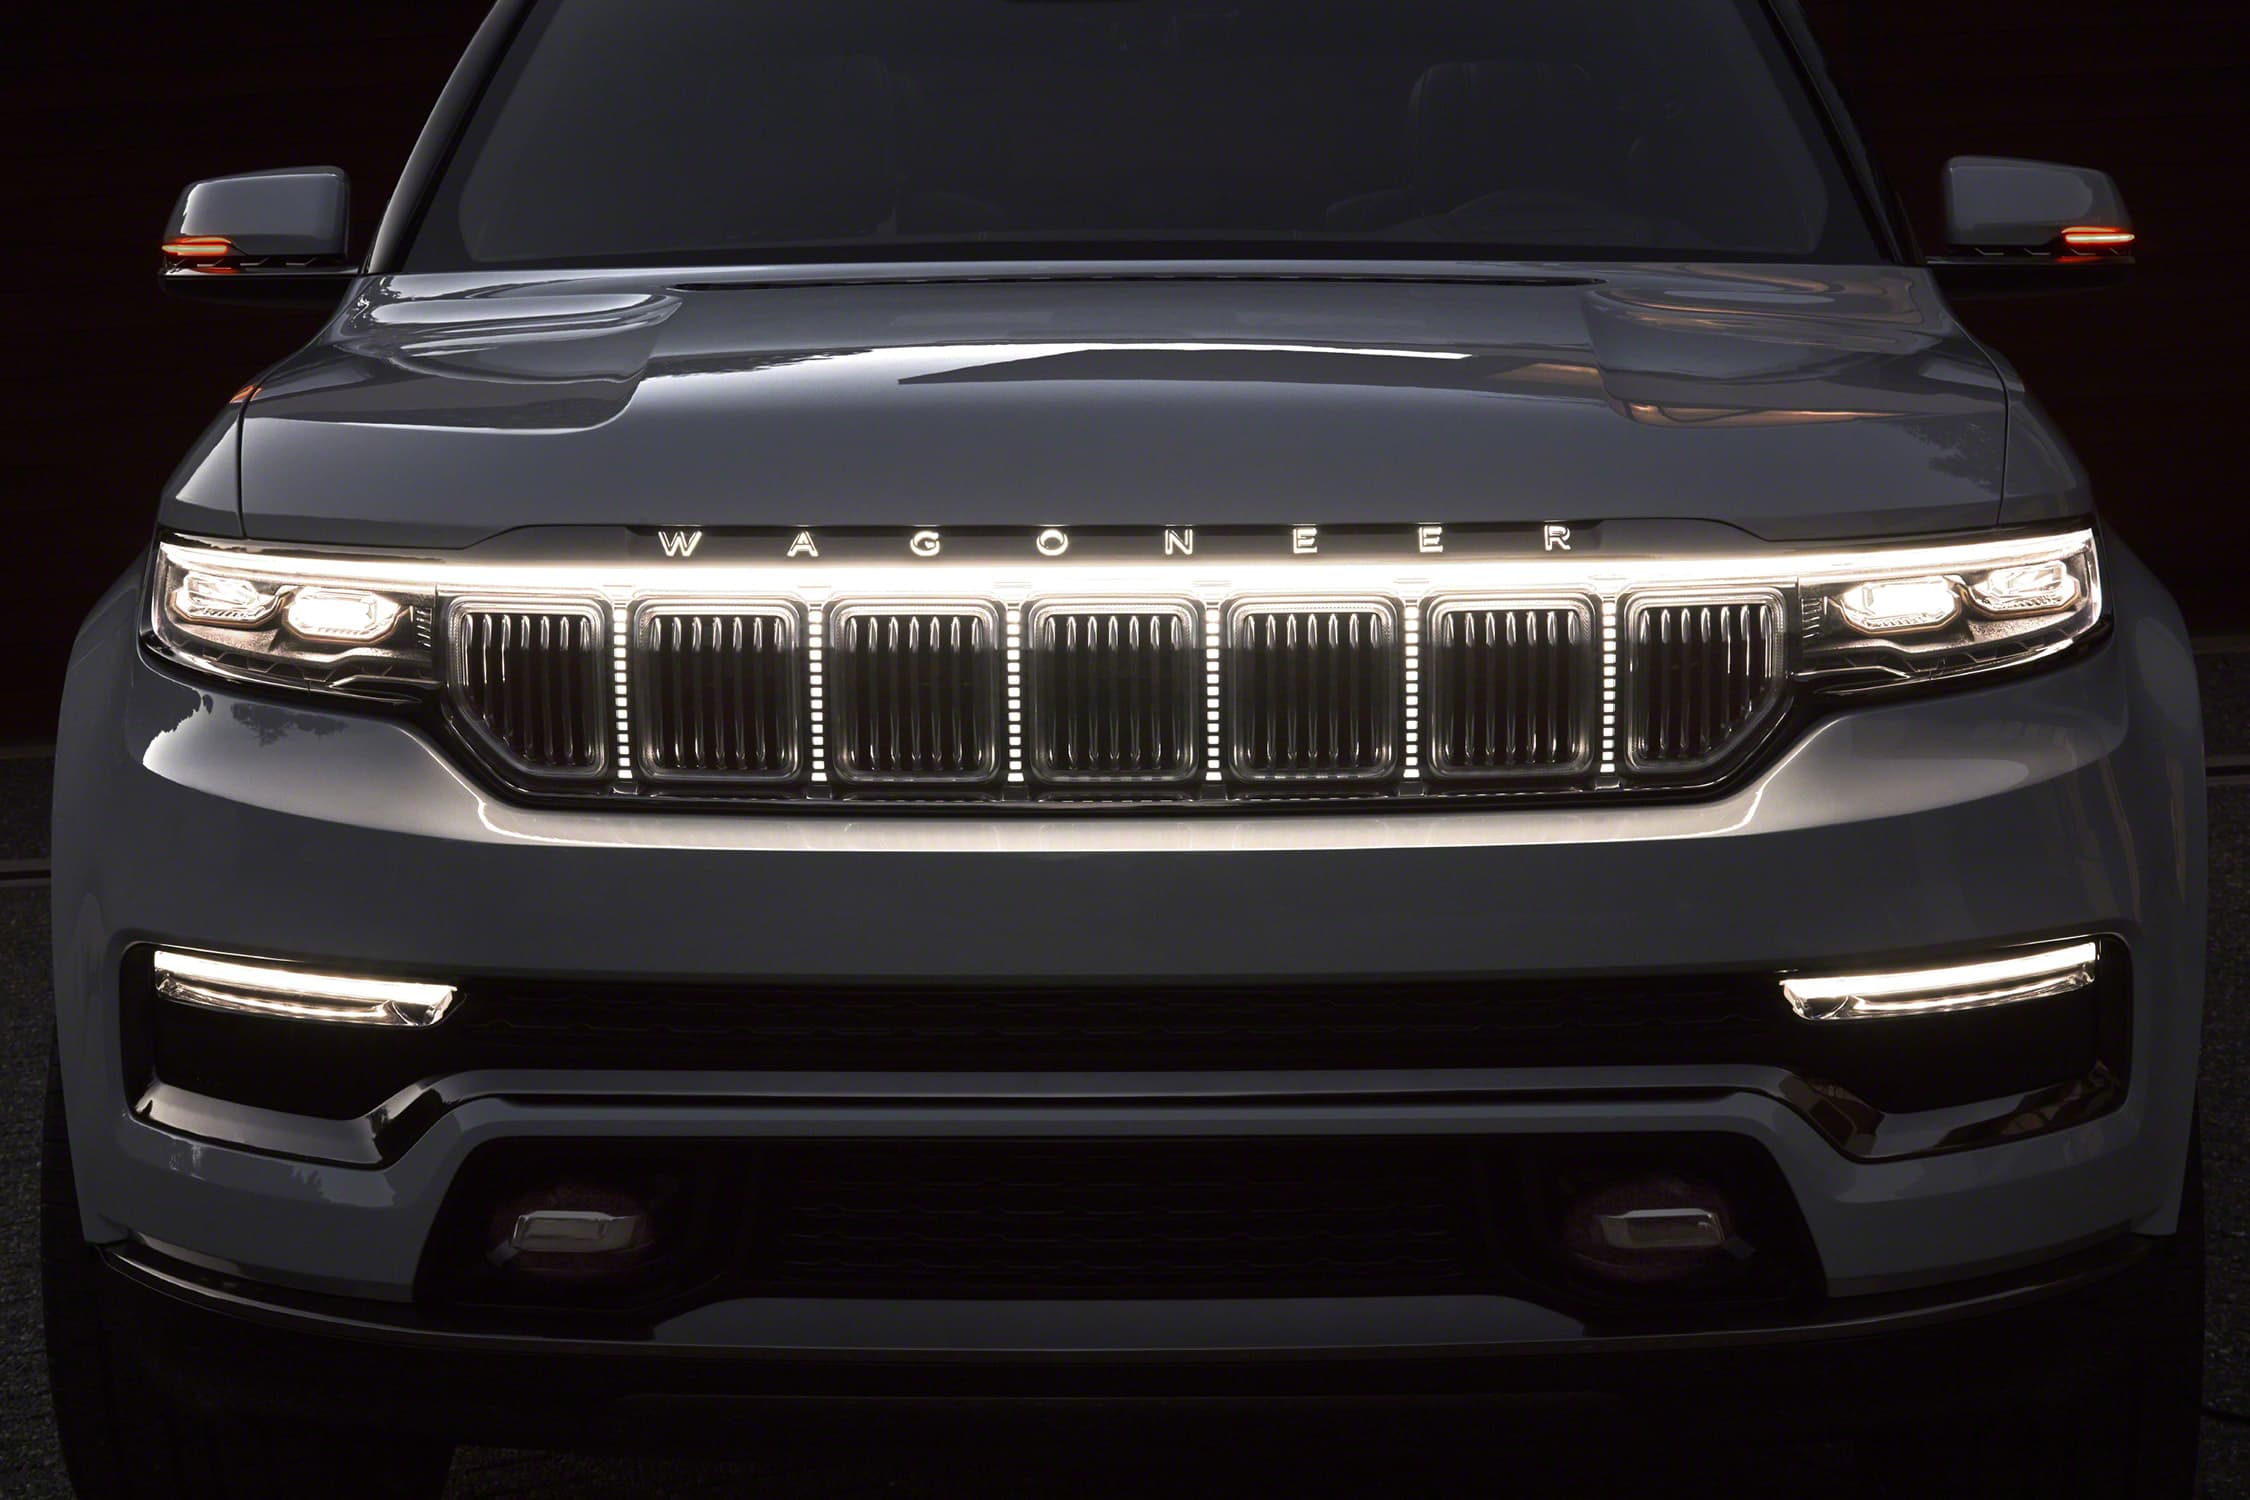 Jeep’s plan to move from gasoline-consuming SUVs to ‘green’ off-road EVs